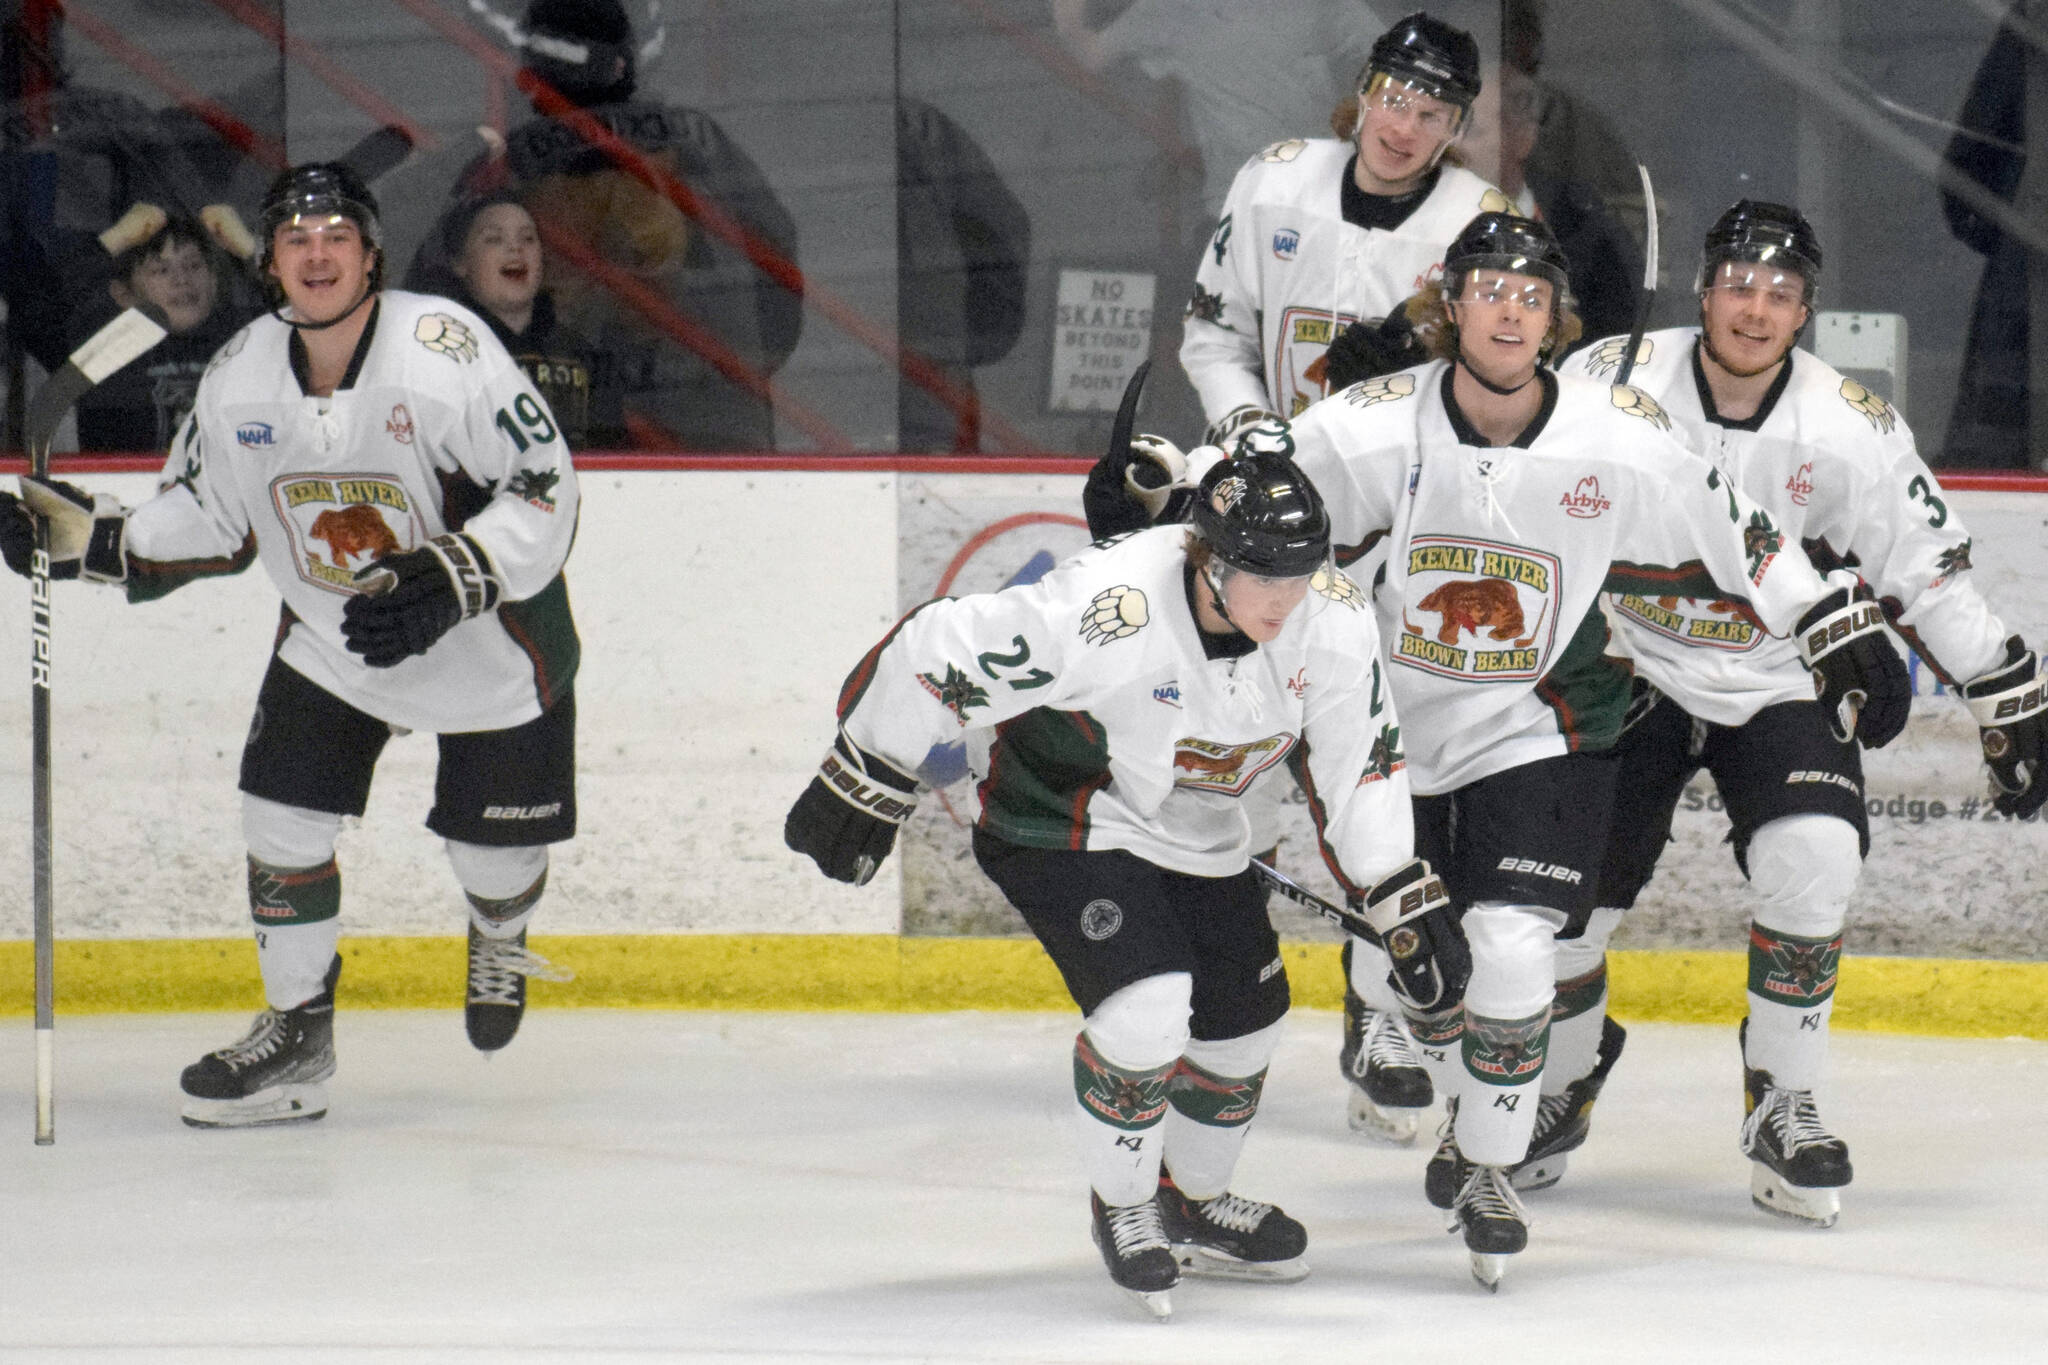 The Kenai River Brown Bears celebrate a goal by Carter Cloutier (21) against the Fairbanks Ice Dogs on Friday, March 11, 2022, at the Soldotna Regional Sports Complex in Soldotna, Alaska. (Photo by Jeff Helminiak/Peninsula Clarion)